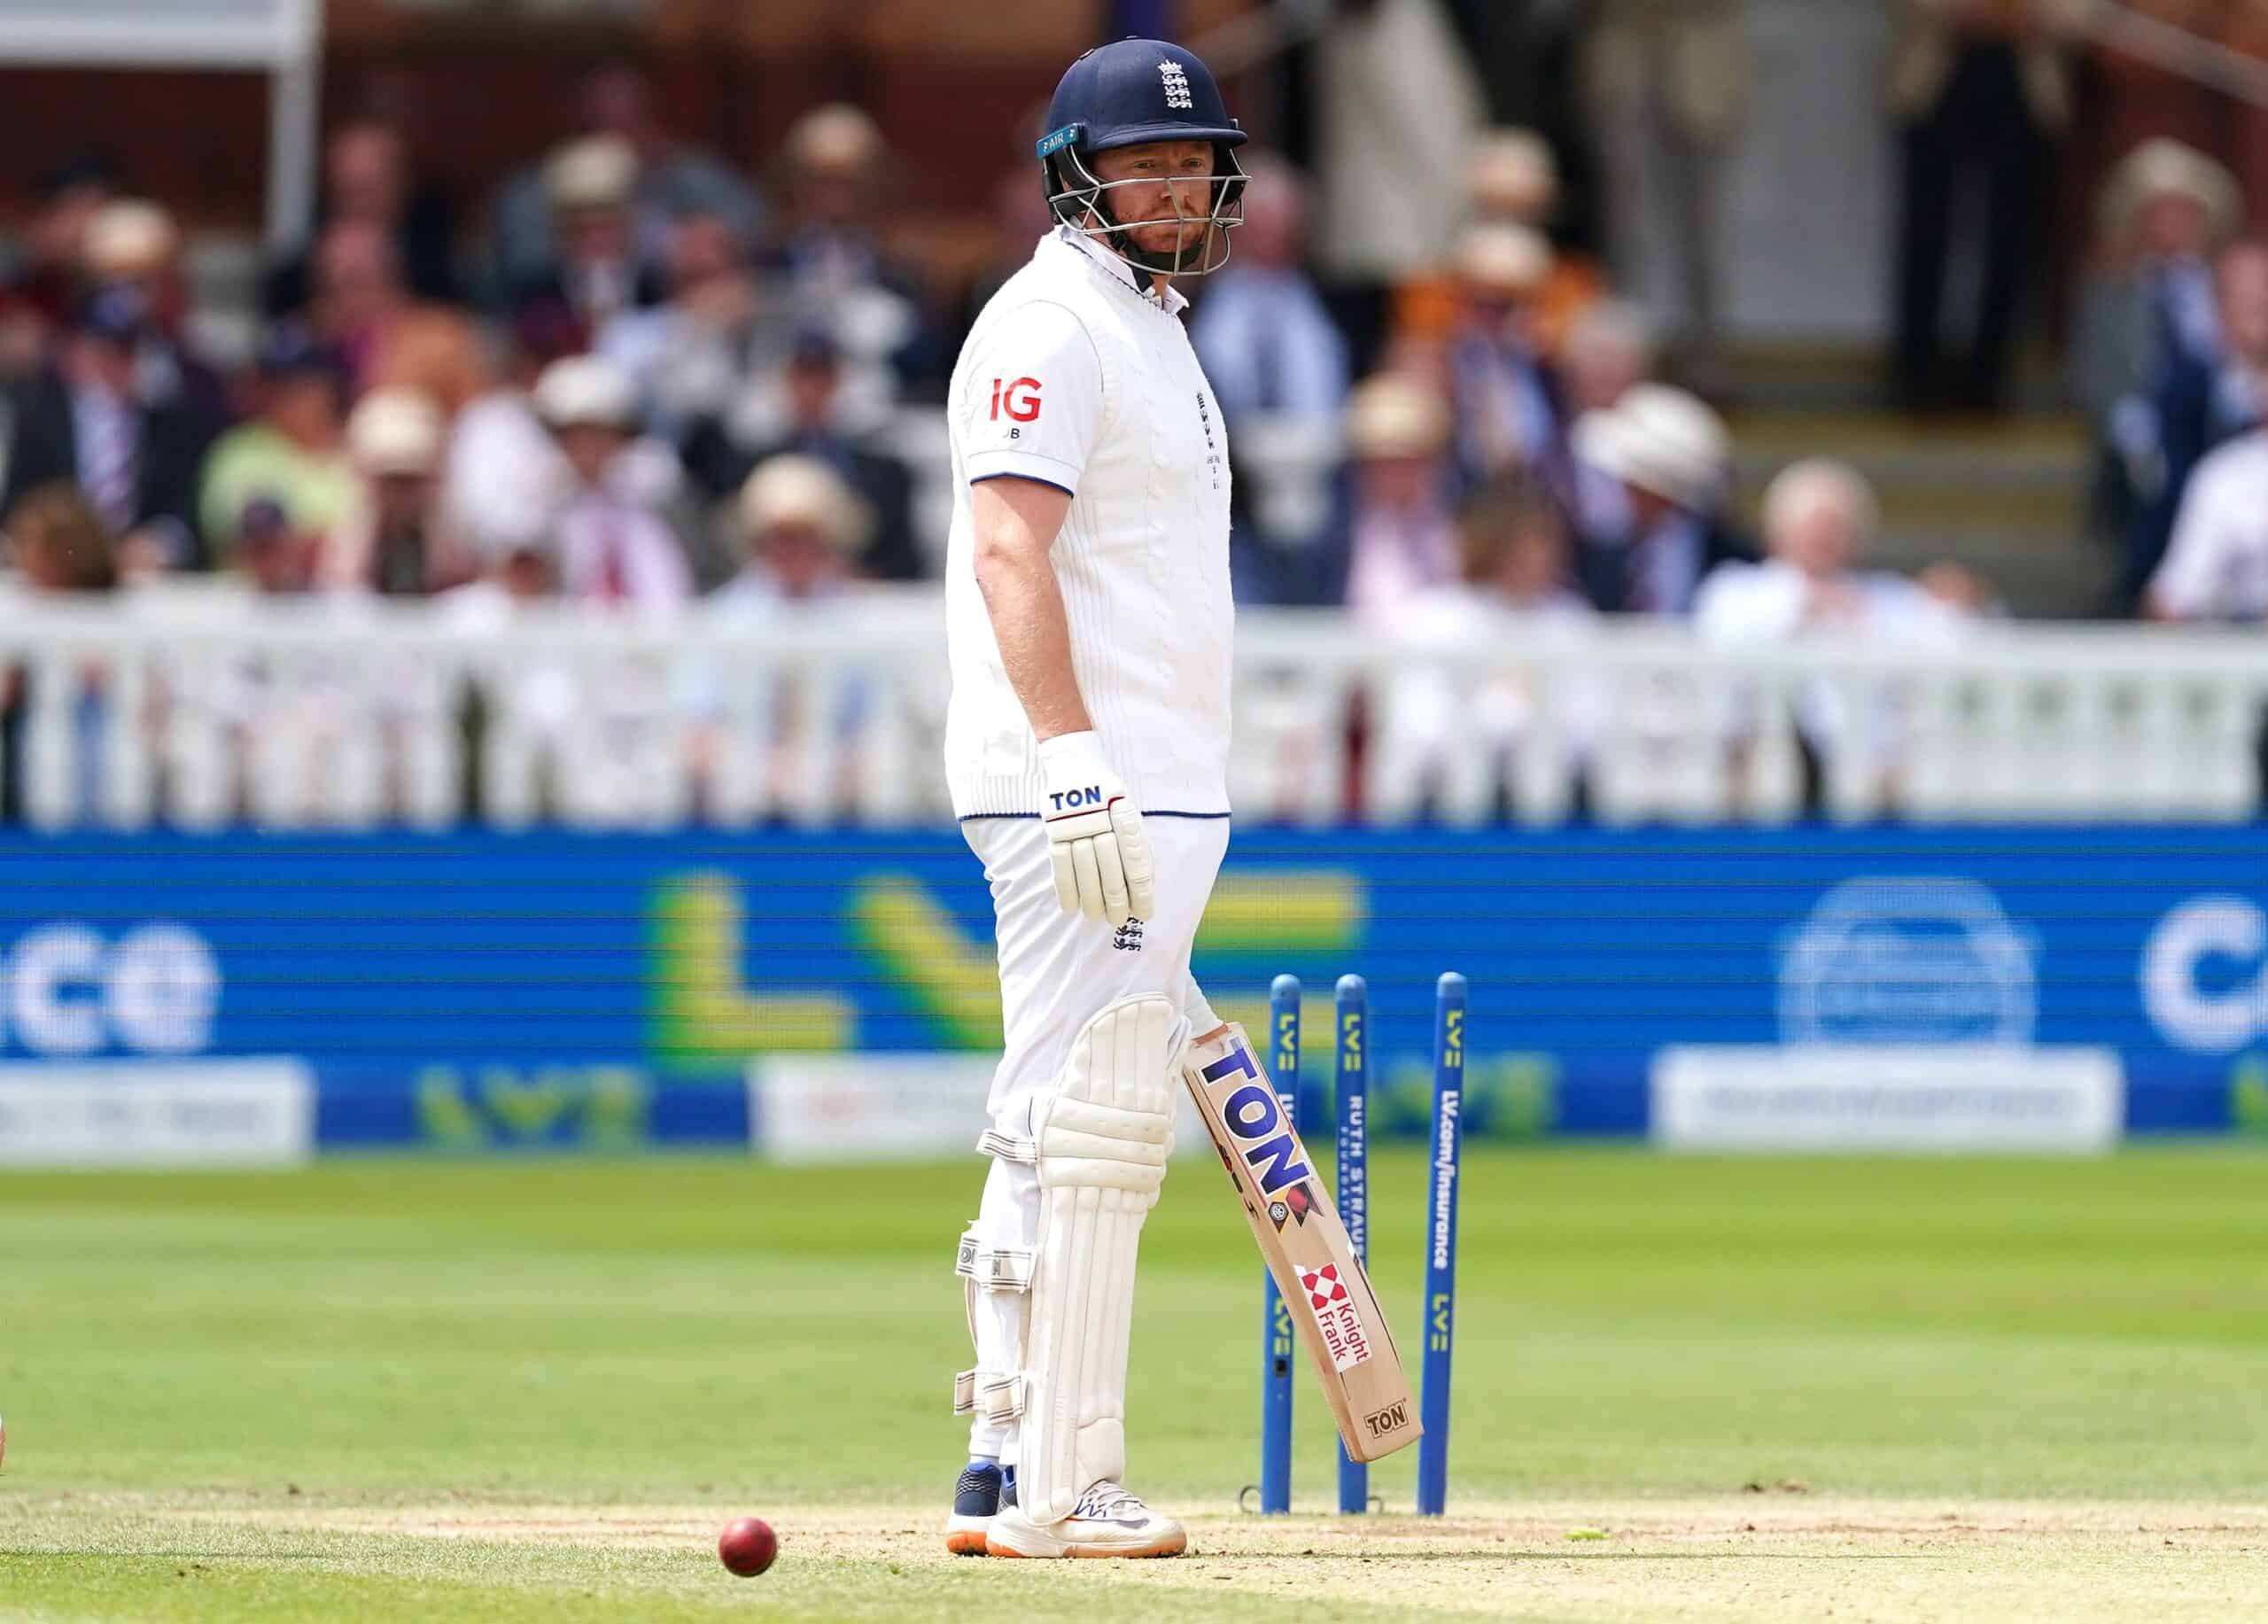 Ashes summer provides more questions than answers for England